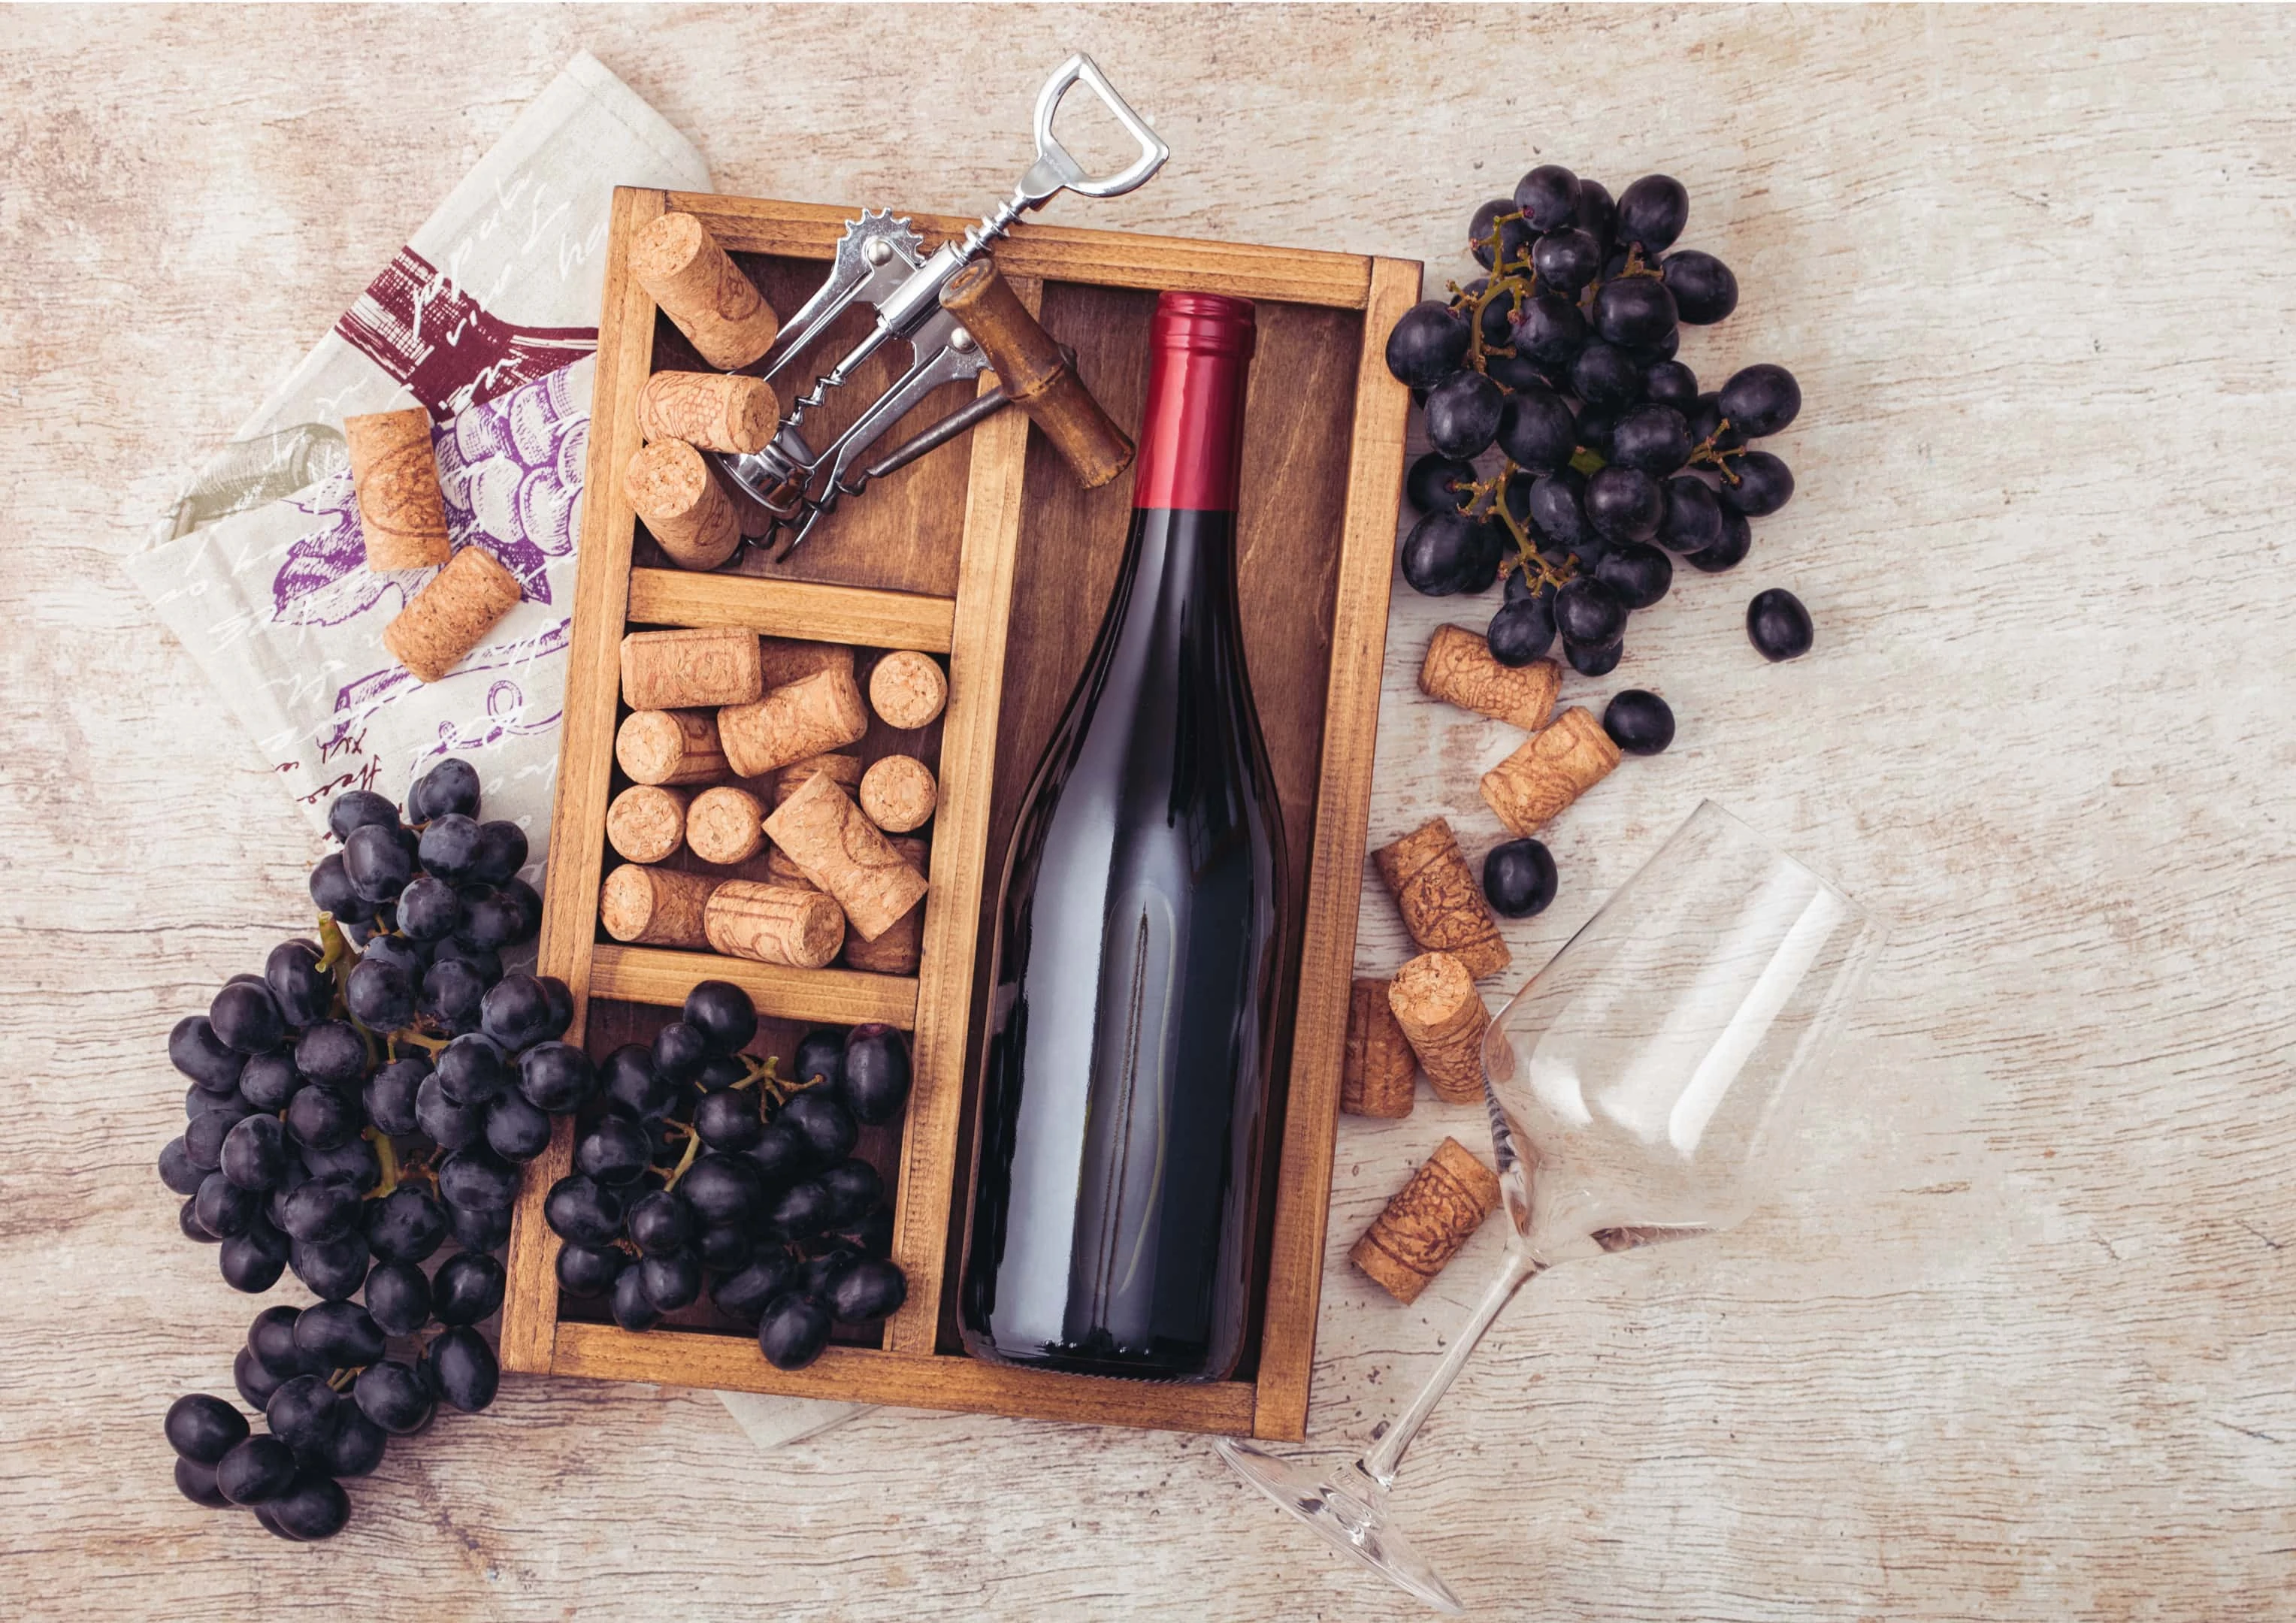 Bottle of red wine with corks and grapes in wooden box